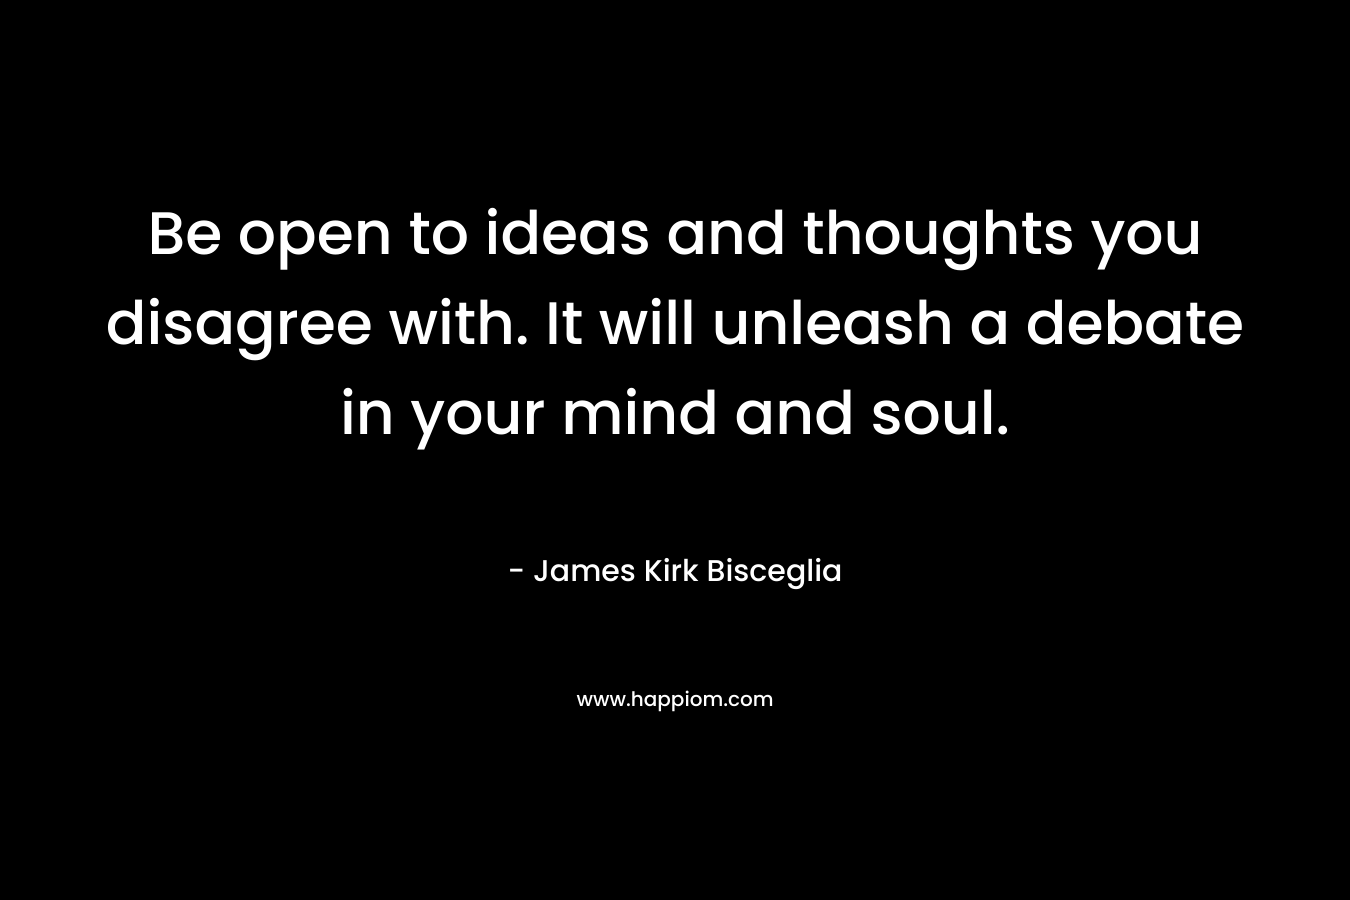 Be open to ideas and thoughts you disagree with. It will unleash a debate in your mind and soul.